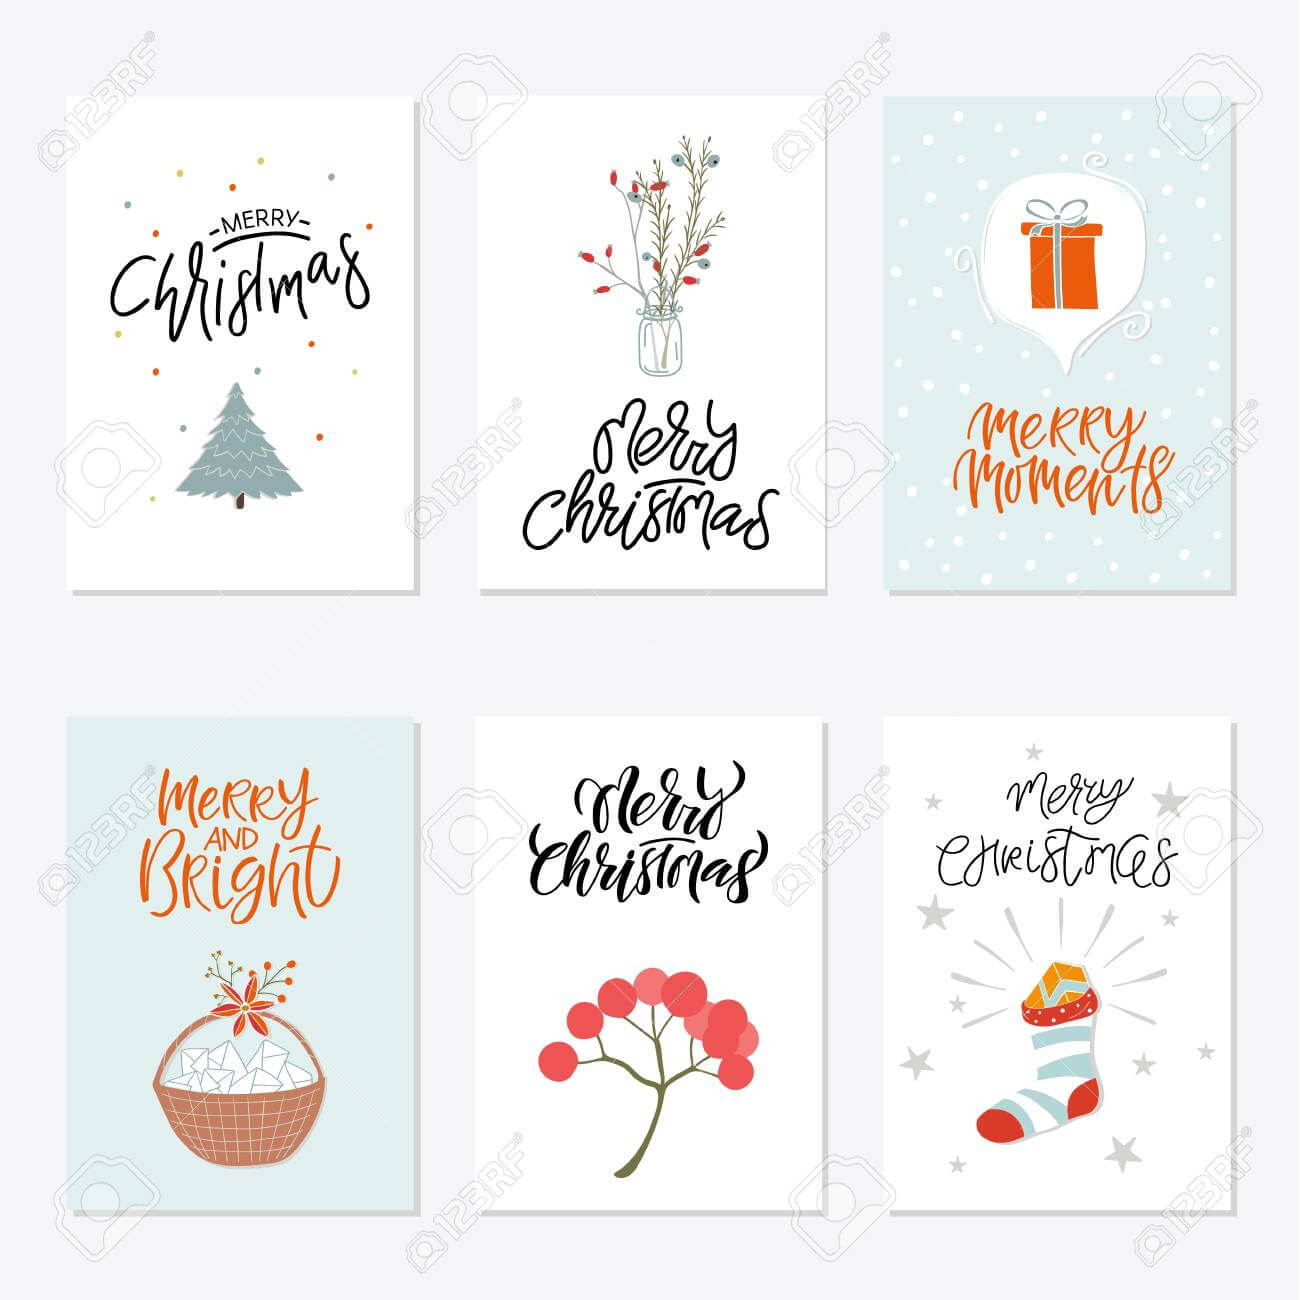 014 Printable Gift Card Template 4076419 Homemade With Regard To Homemade Christmas Gift Certificates Templates